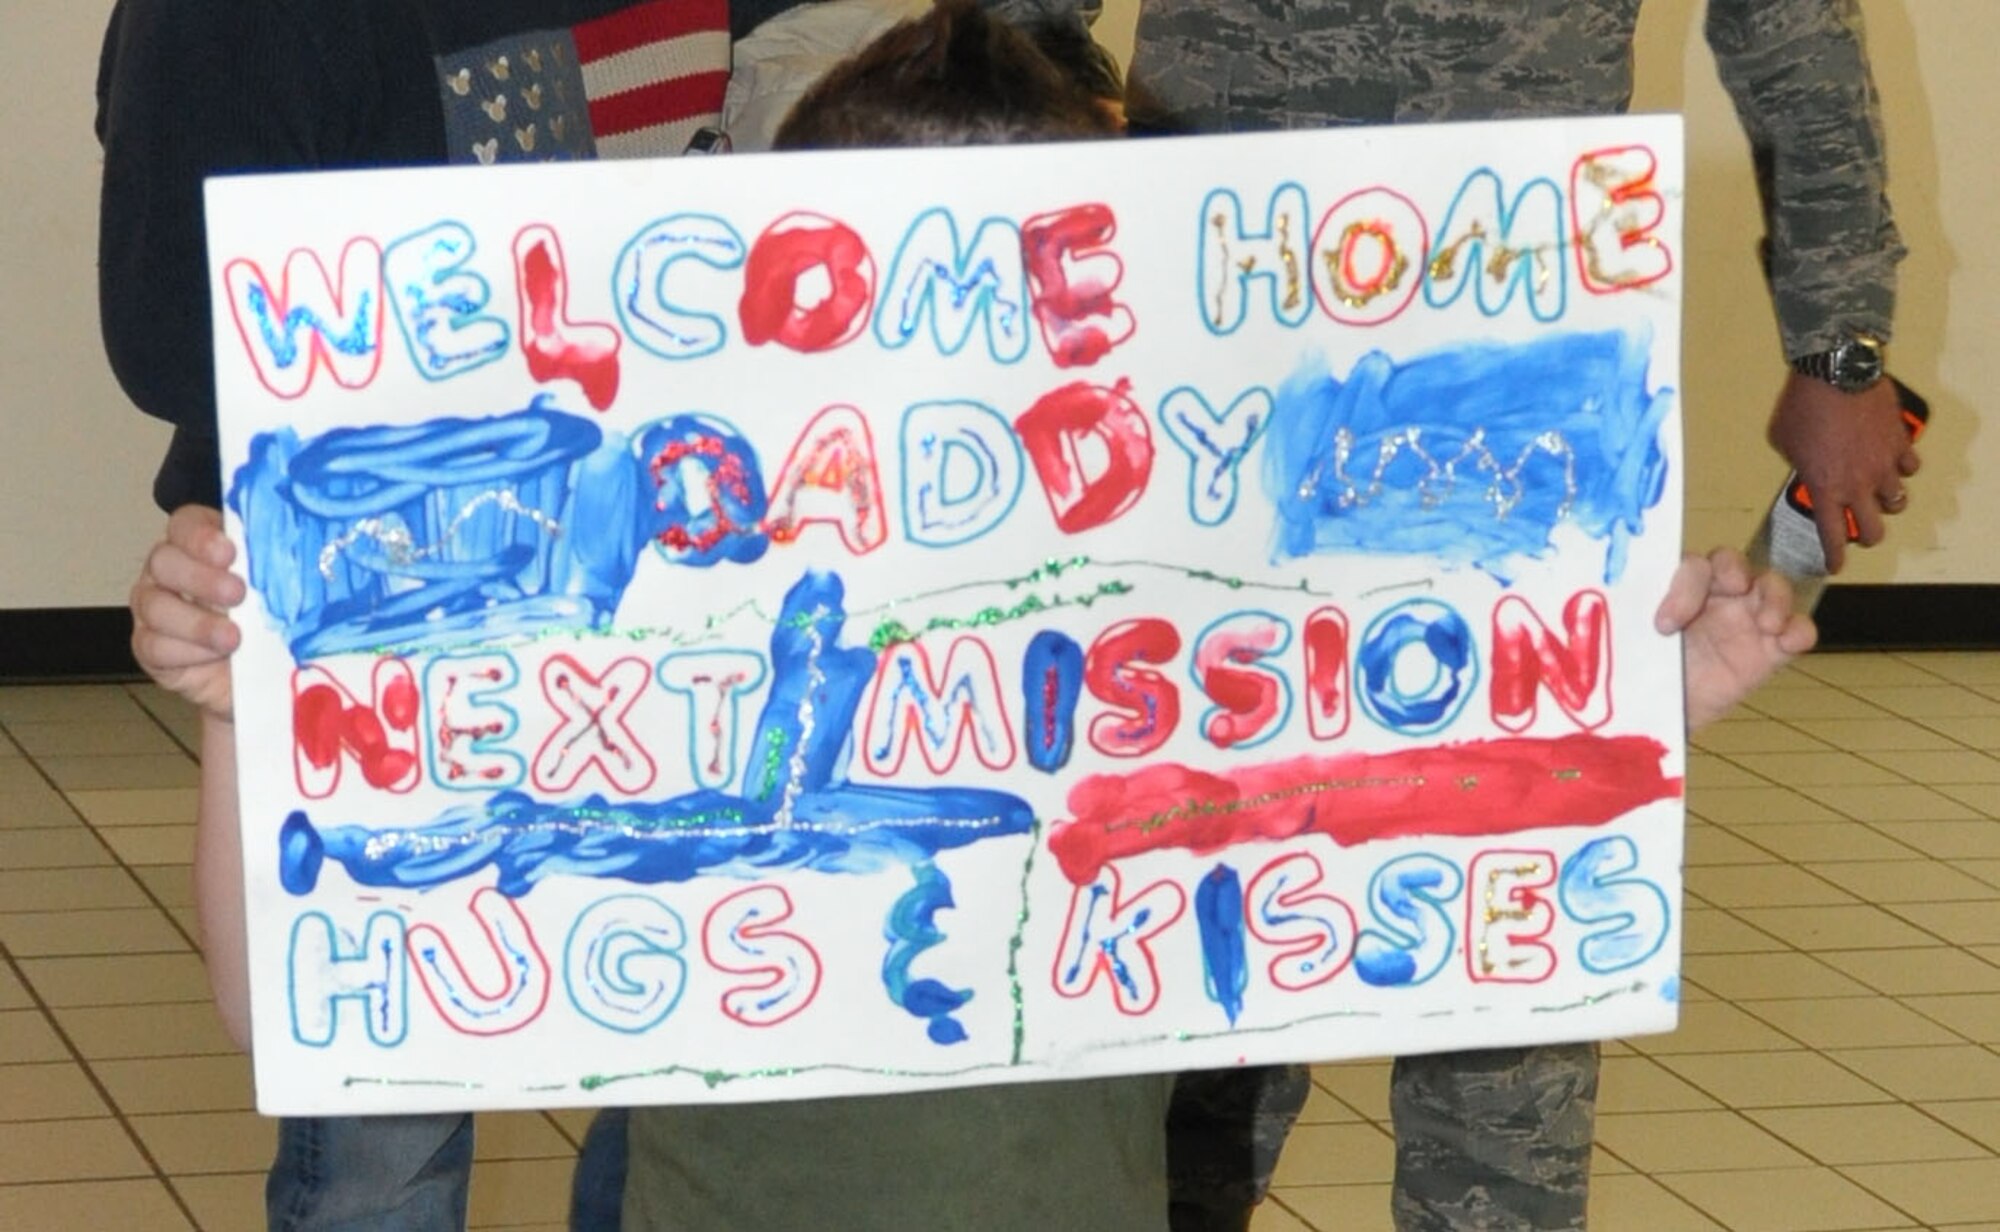 Upon returning home from a two-month deployment to Afghanistan, one Airman from the 301st Fighter Wing received another tasking order, "Next mission: hugs & kisses." (U.S. Air Force photo/Laura Dermarderosiansmith)